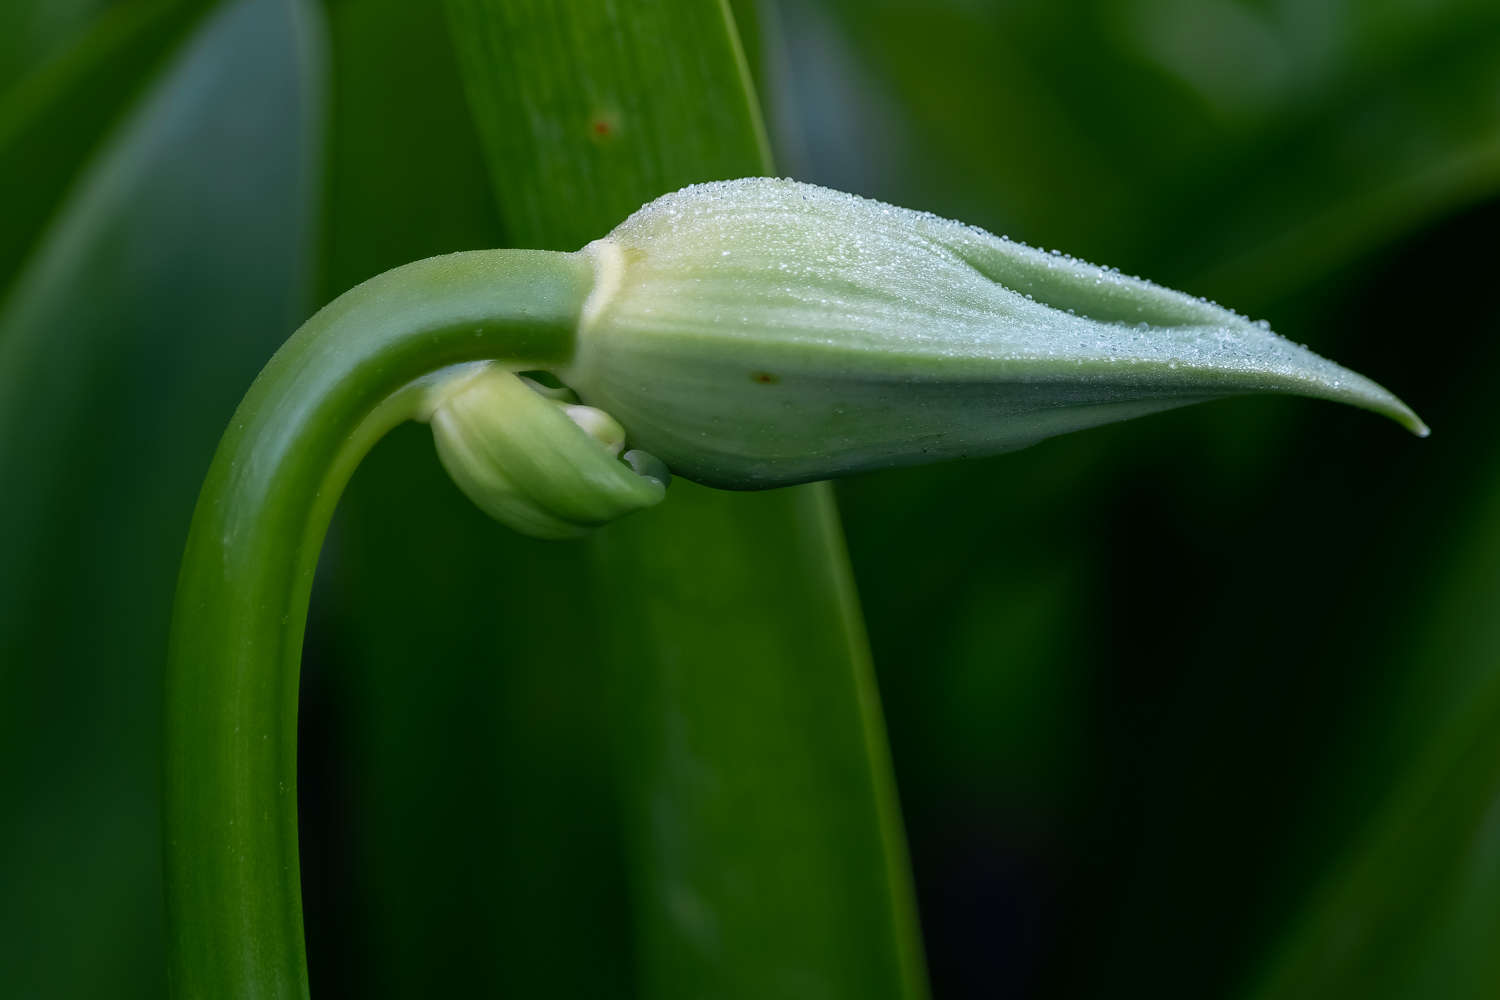 A bent agapanthus stalk with a bud pointing to the right